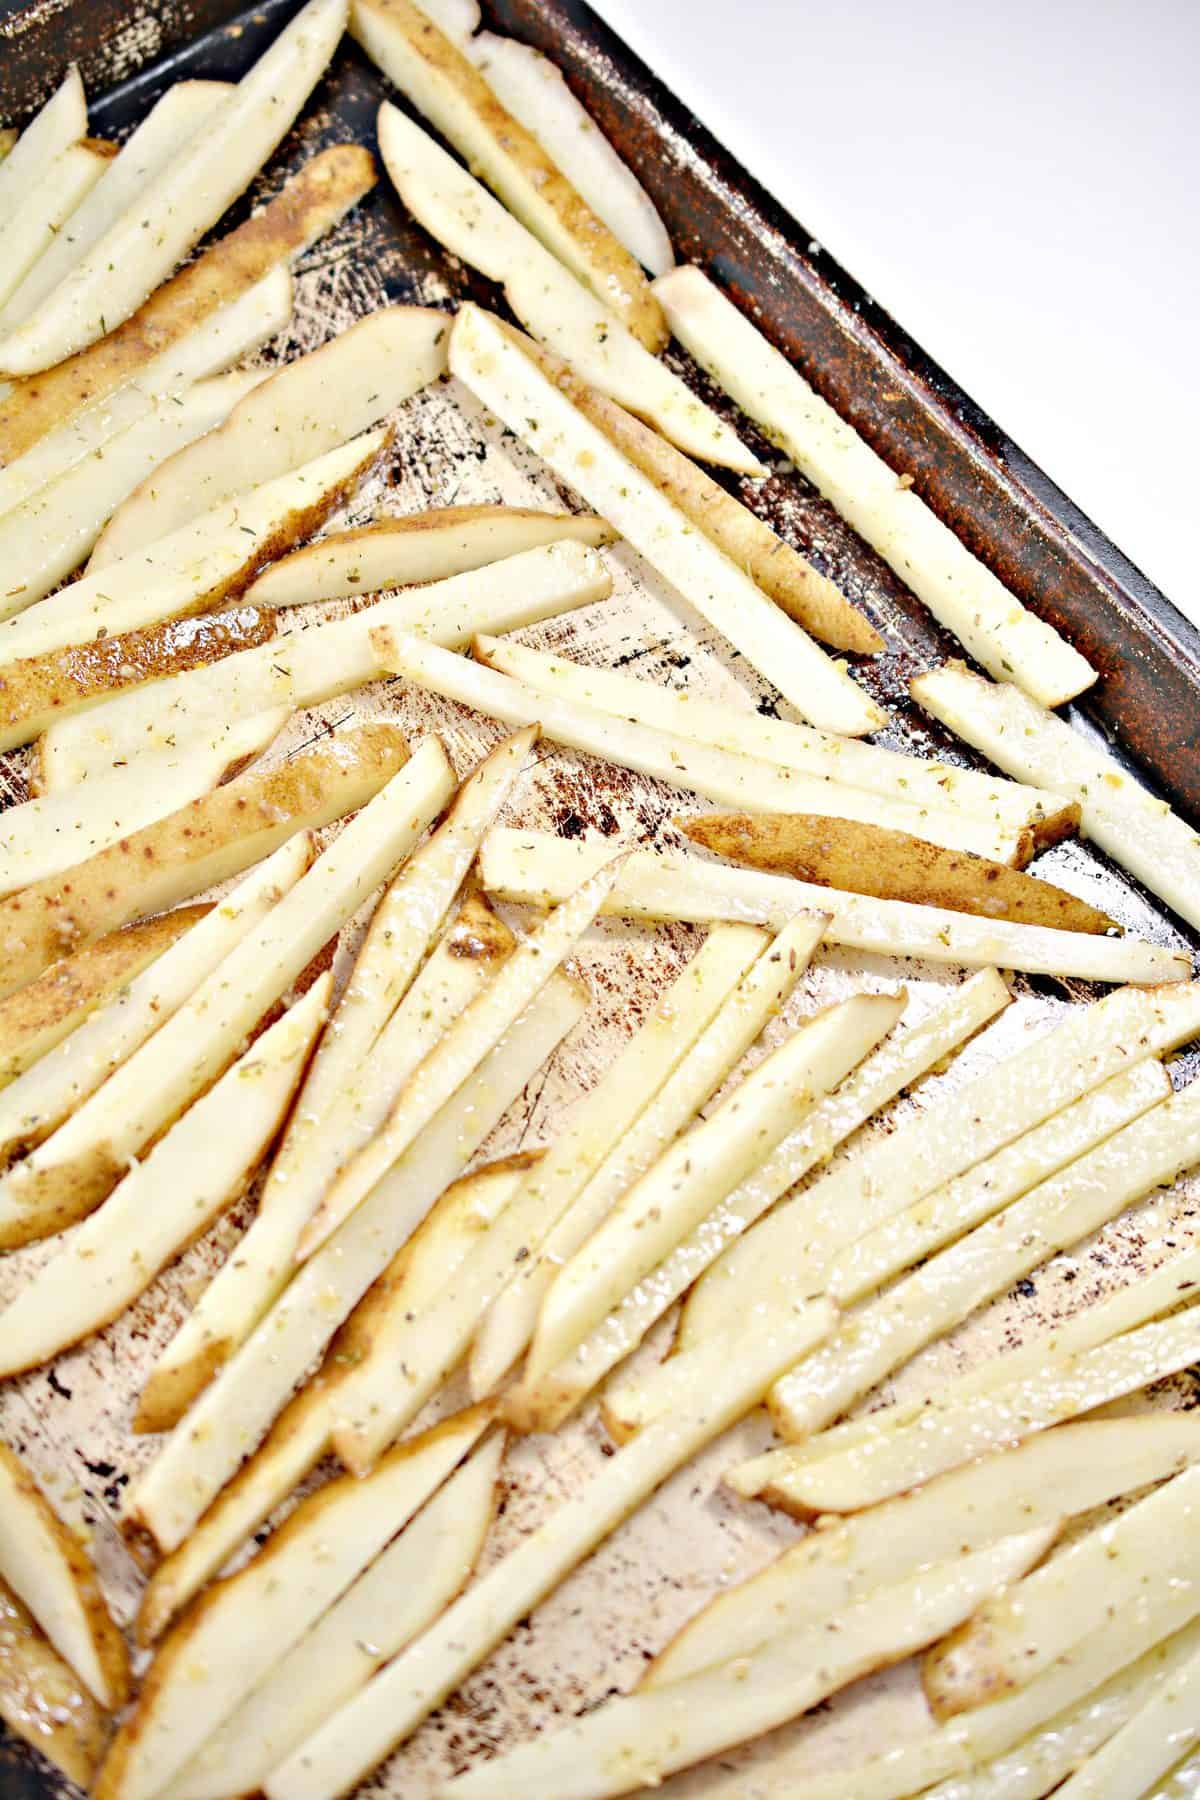 Spread the fries out in an even layer on a baking sheet.